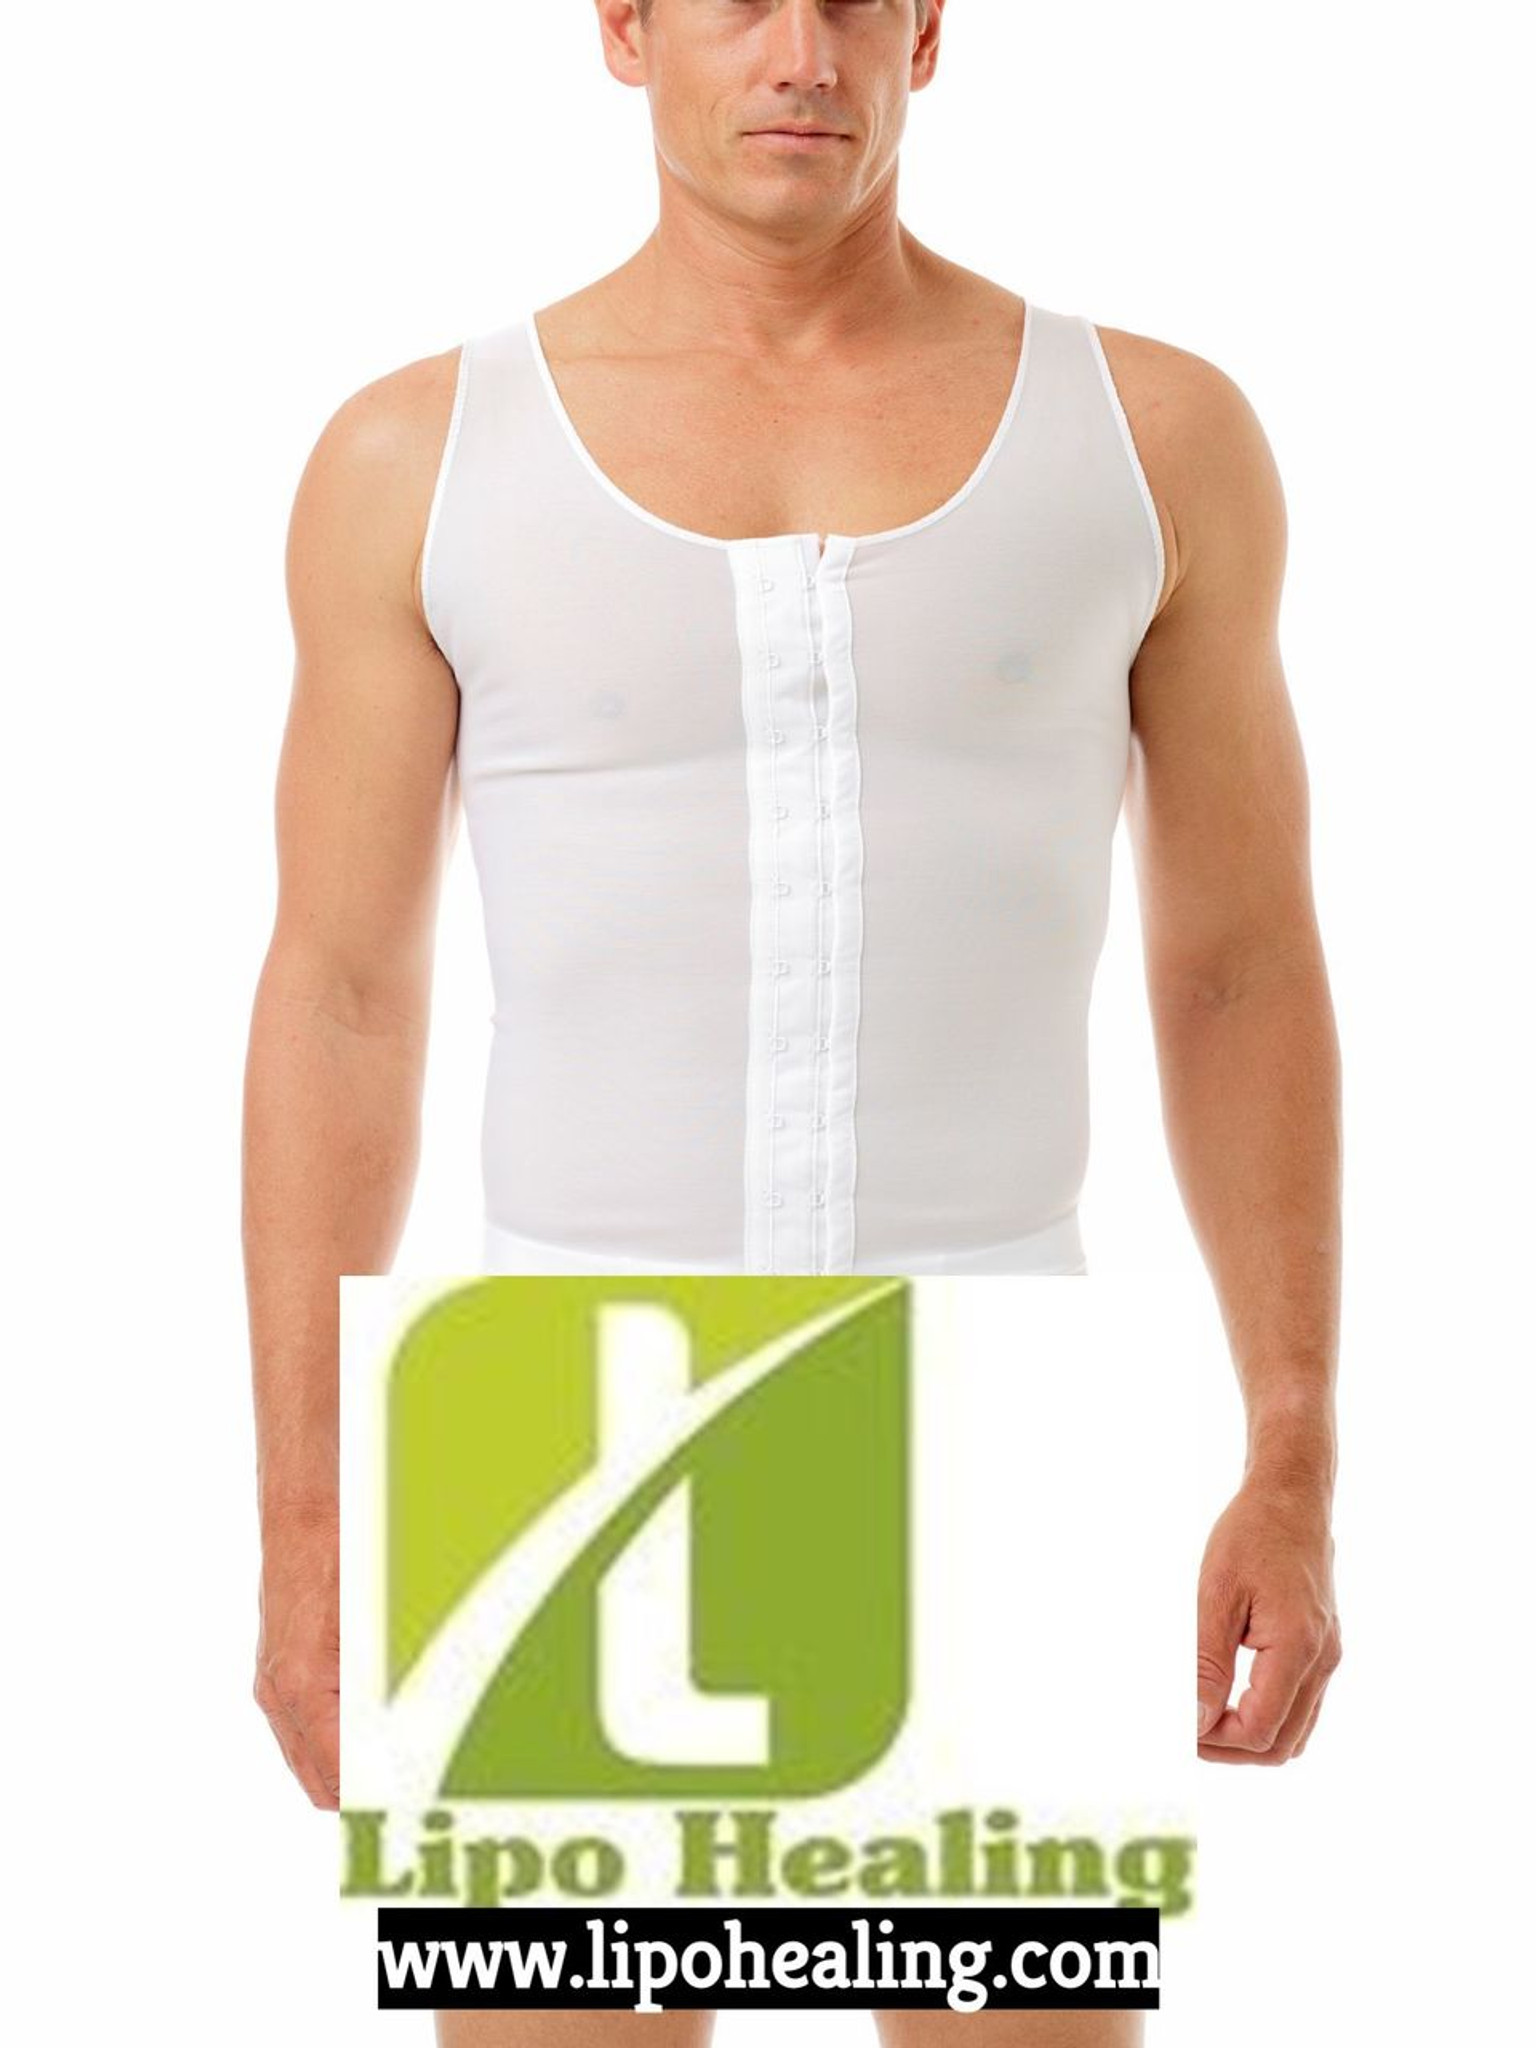 2nd Stage Male Abdominal Cosmetic Surgery Compression Vest MADE IN THE USA  formaldehyde free - Liposuction Healing Foam, Lipo Foam